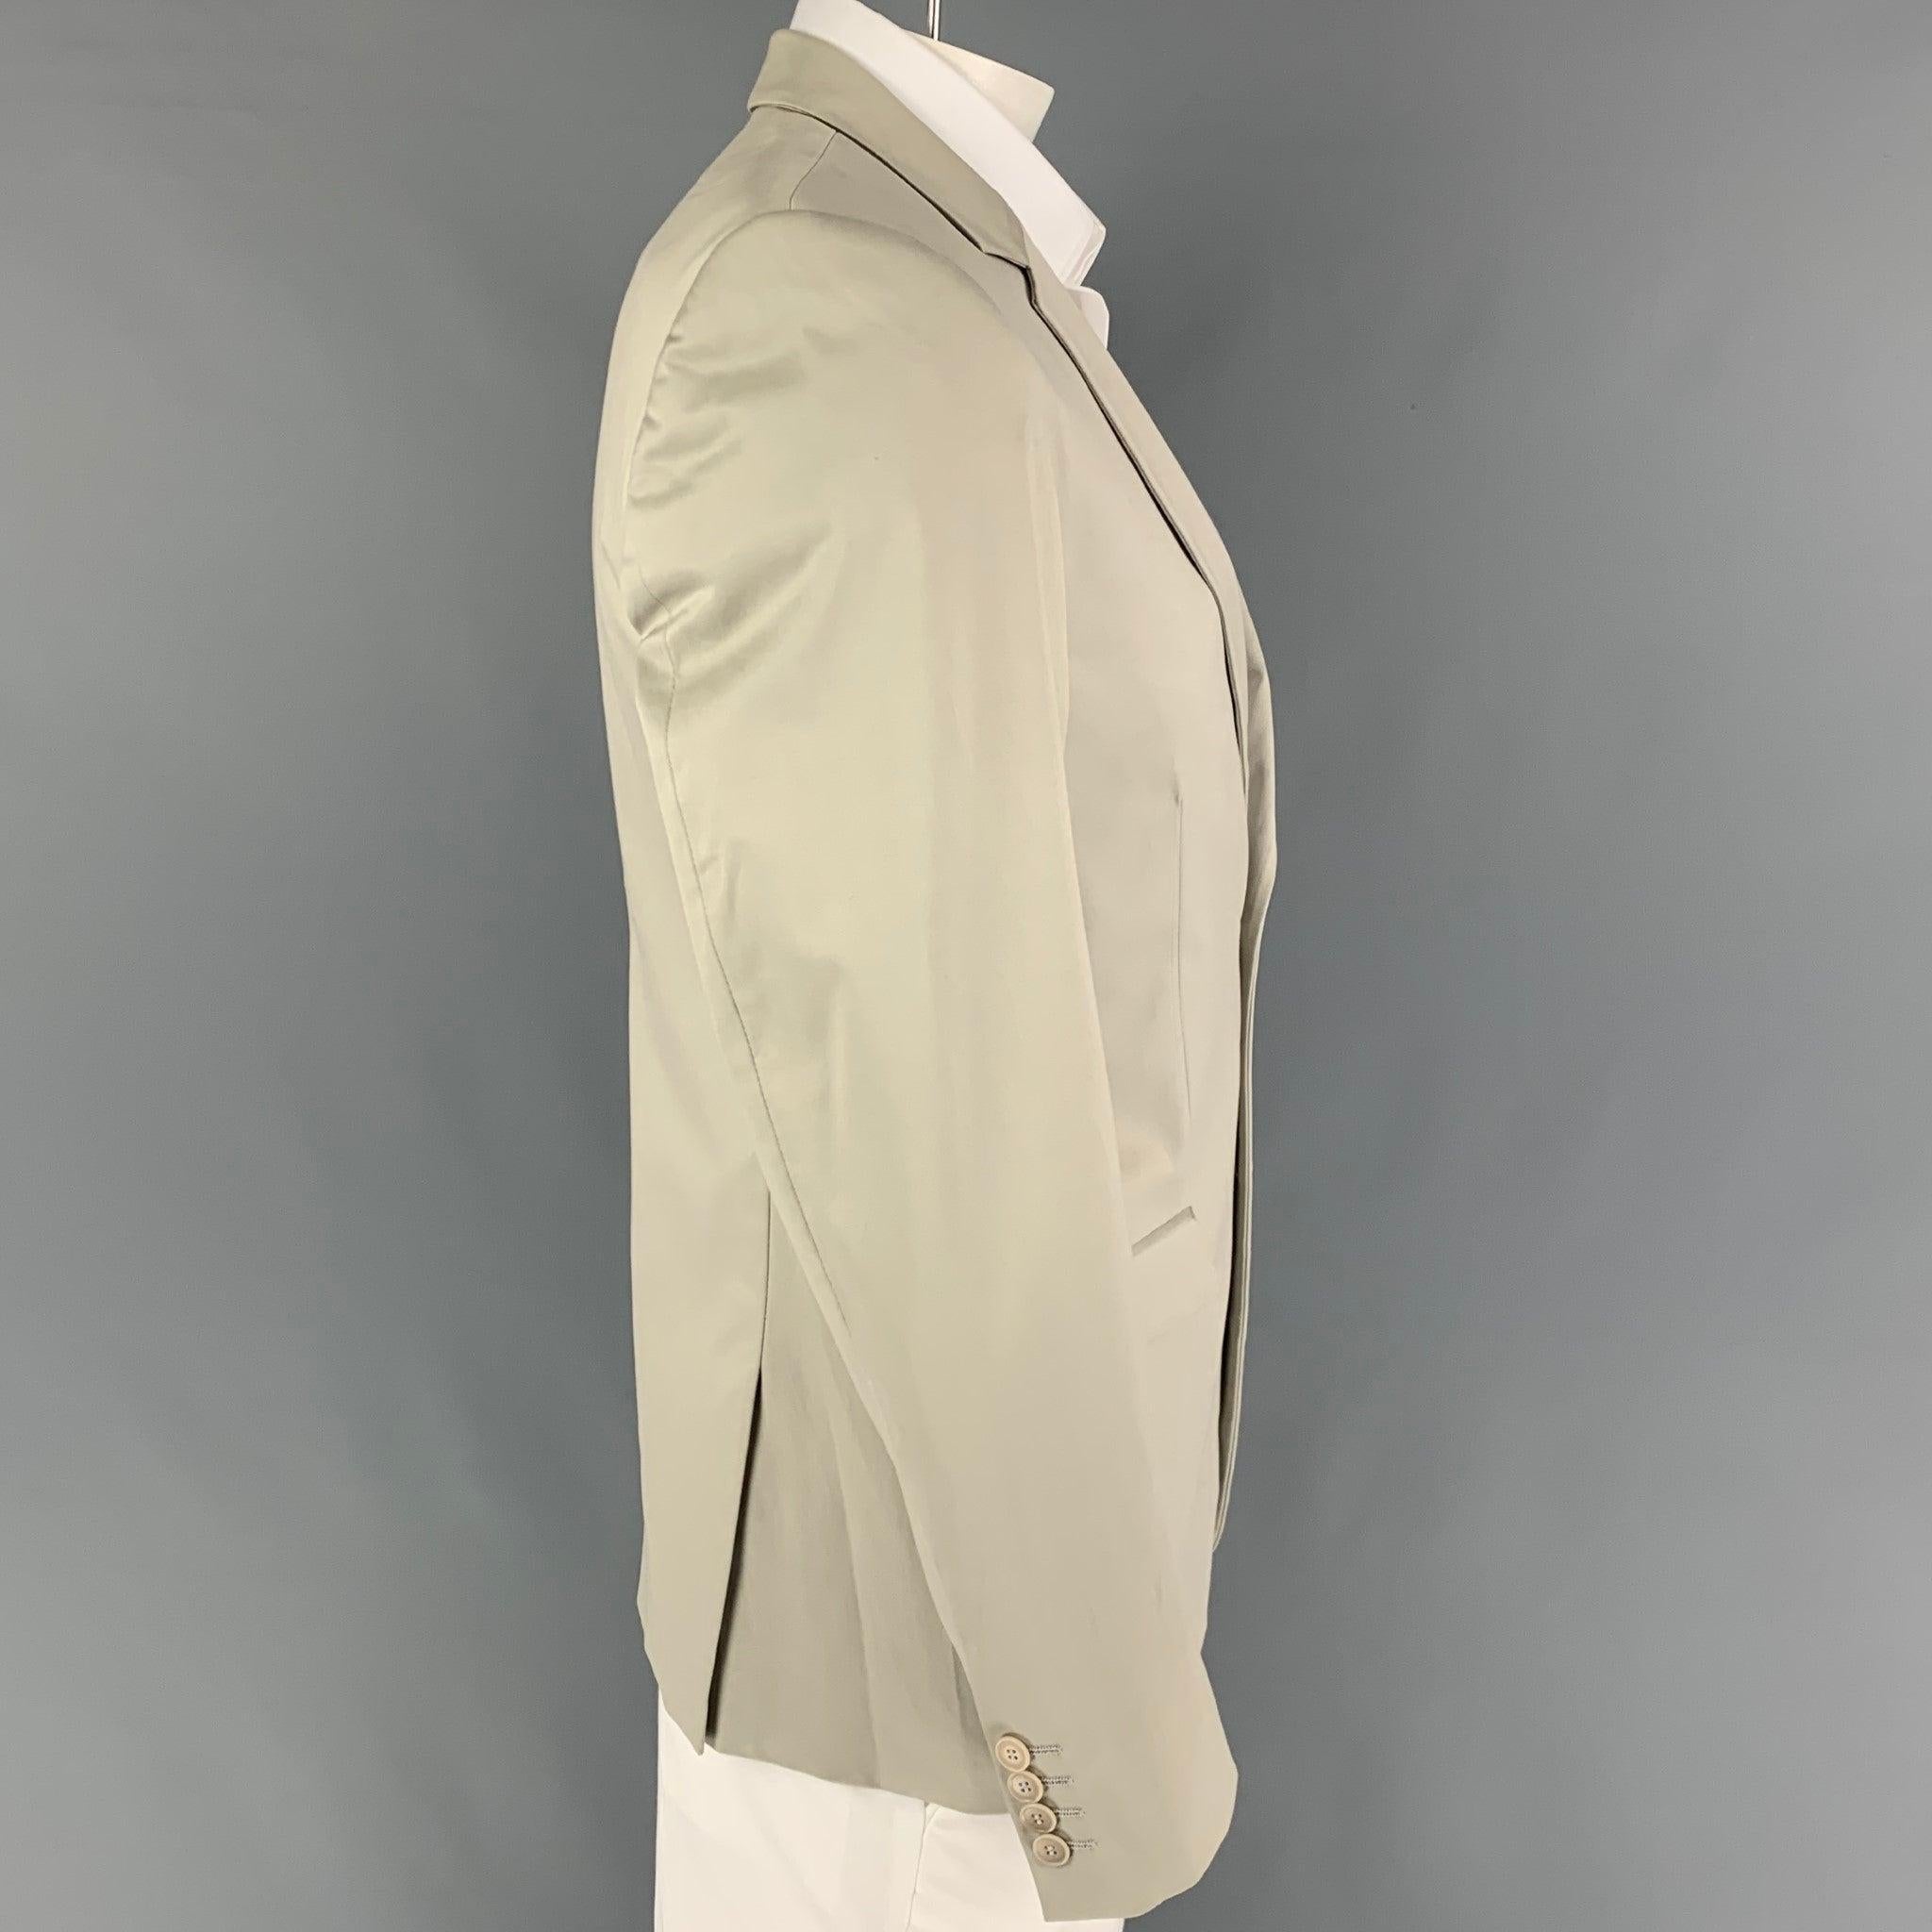 CALVIN KLEIN COLLECTION sport coat comes in a khaki cotton with a full liner featuring a notch lapel, flap pockets, double back vent, and a double button closure.
Very Good
Pre-Owned Condition. 

Marked:   50/40 

Measurements: 
 
Shoulder:
18